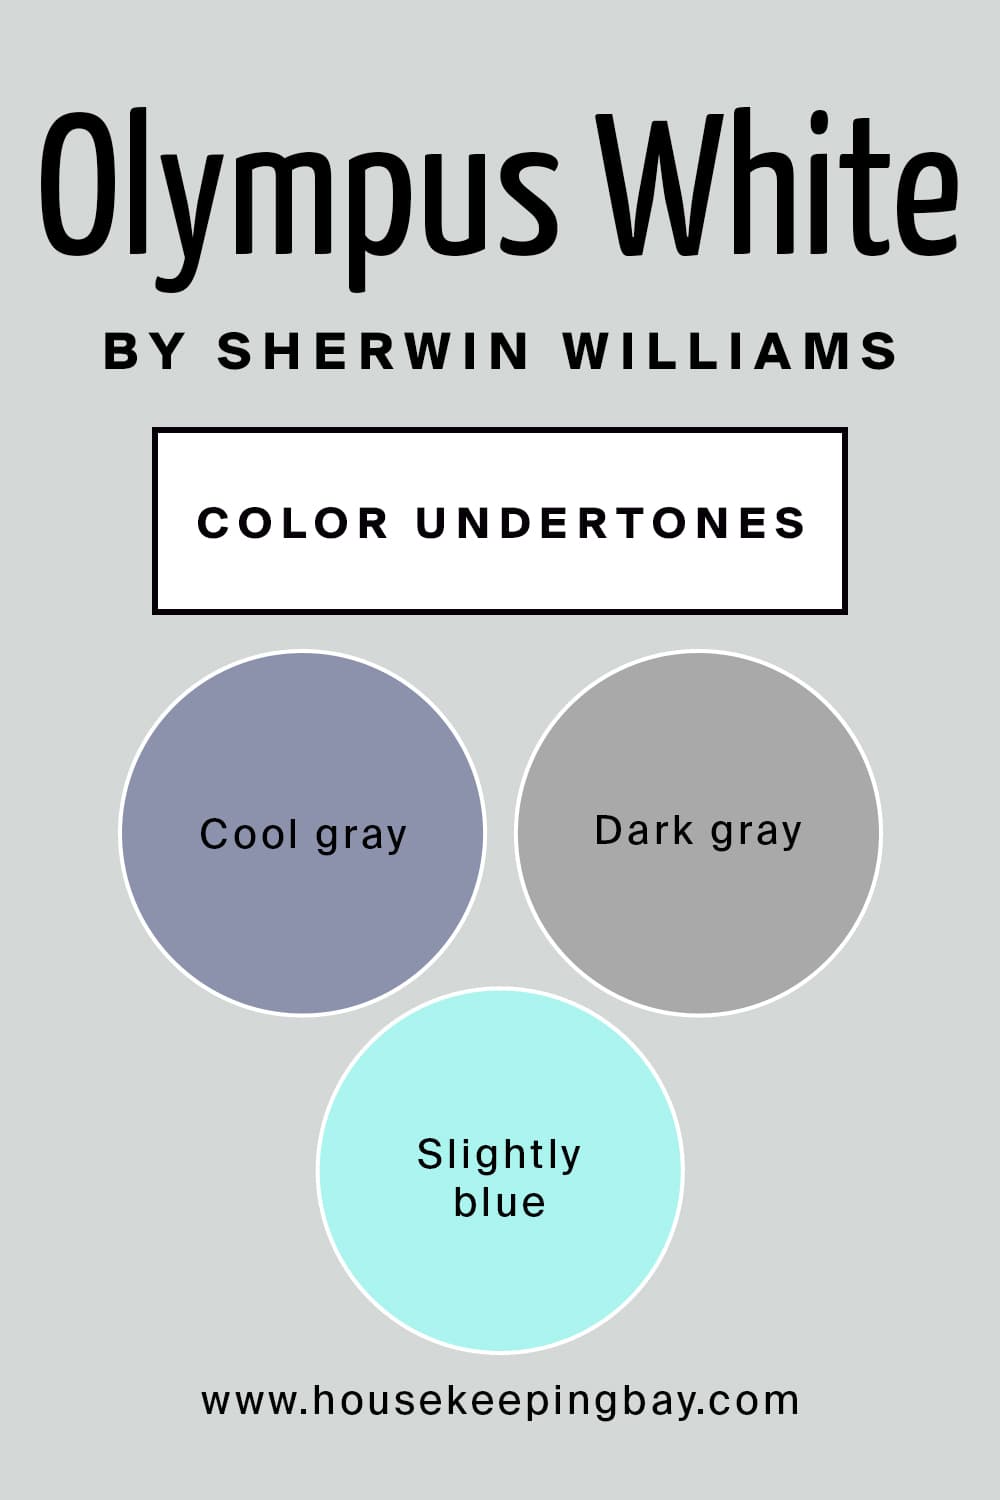 Olympus White by Sherwin Williams Color Undertones